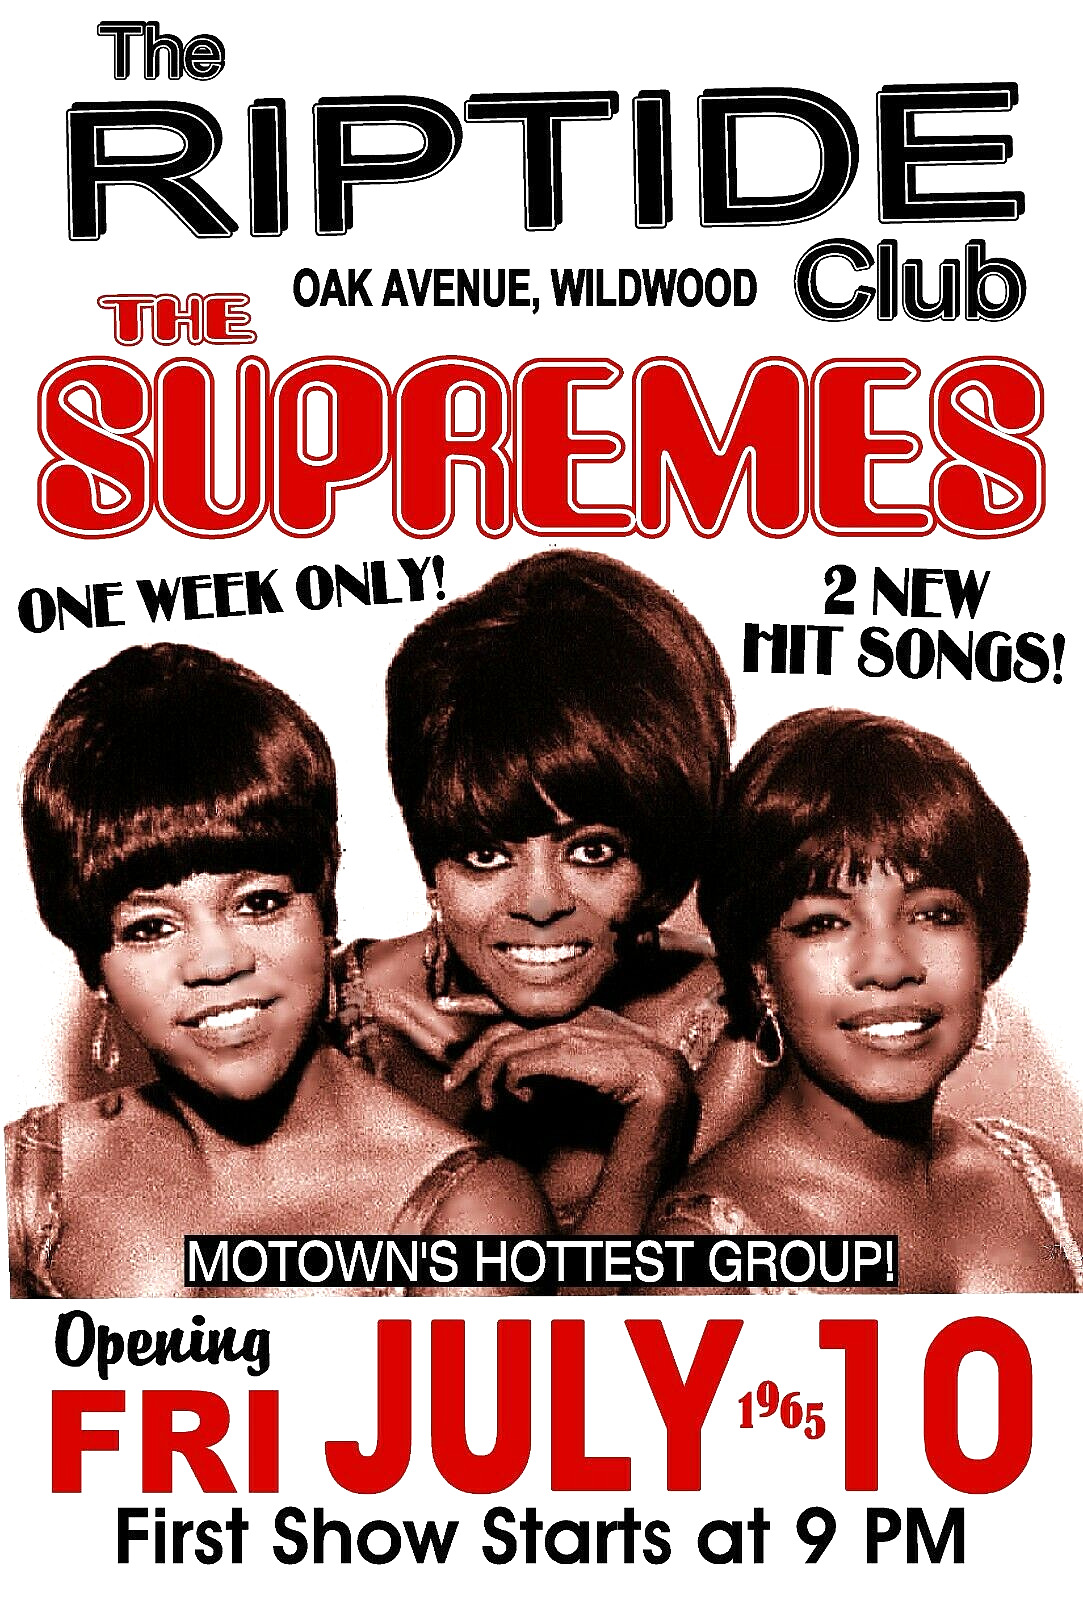 THE SUPREMES 1965 THE RIPTIDE CLUB Gig Poster Wildwood NJ Nightclub POSTER FLYER